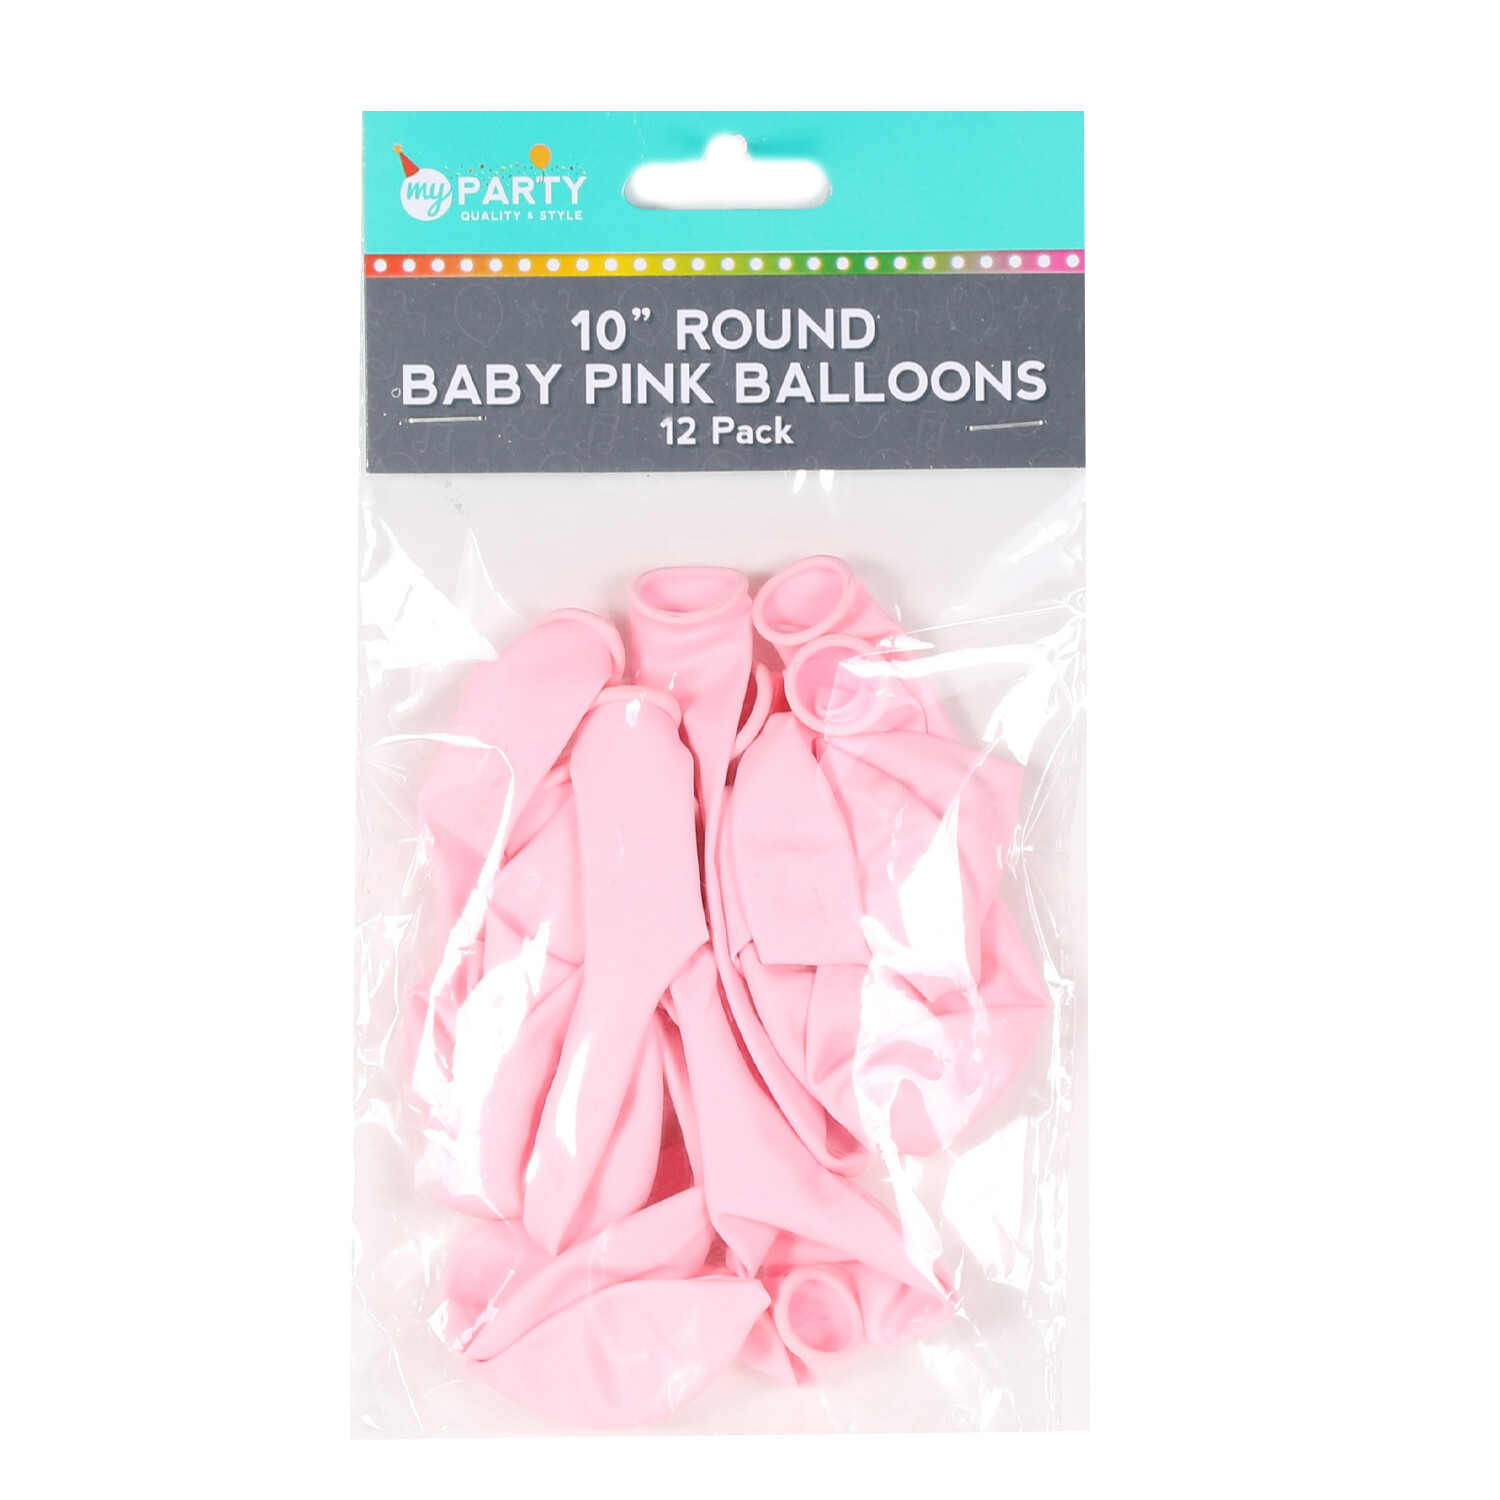 Pack of 12 10" Round Baby Balloons - Pink Image